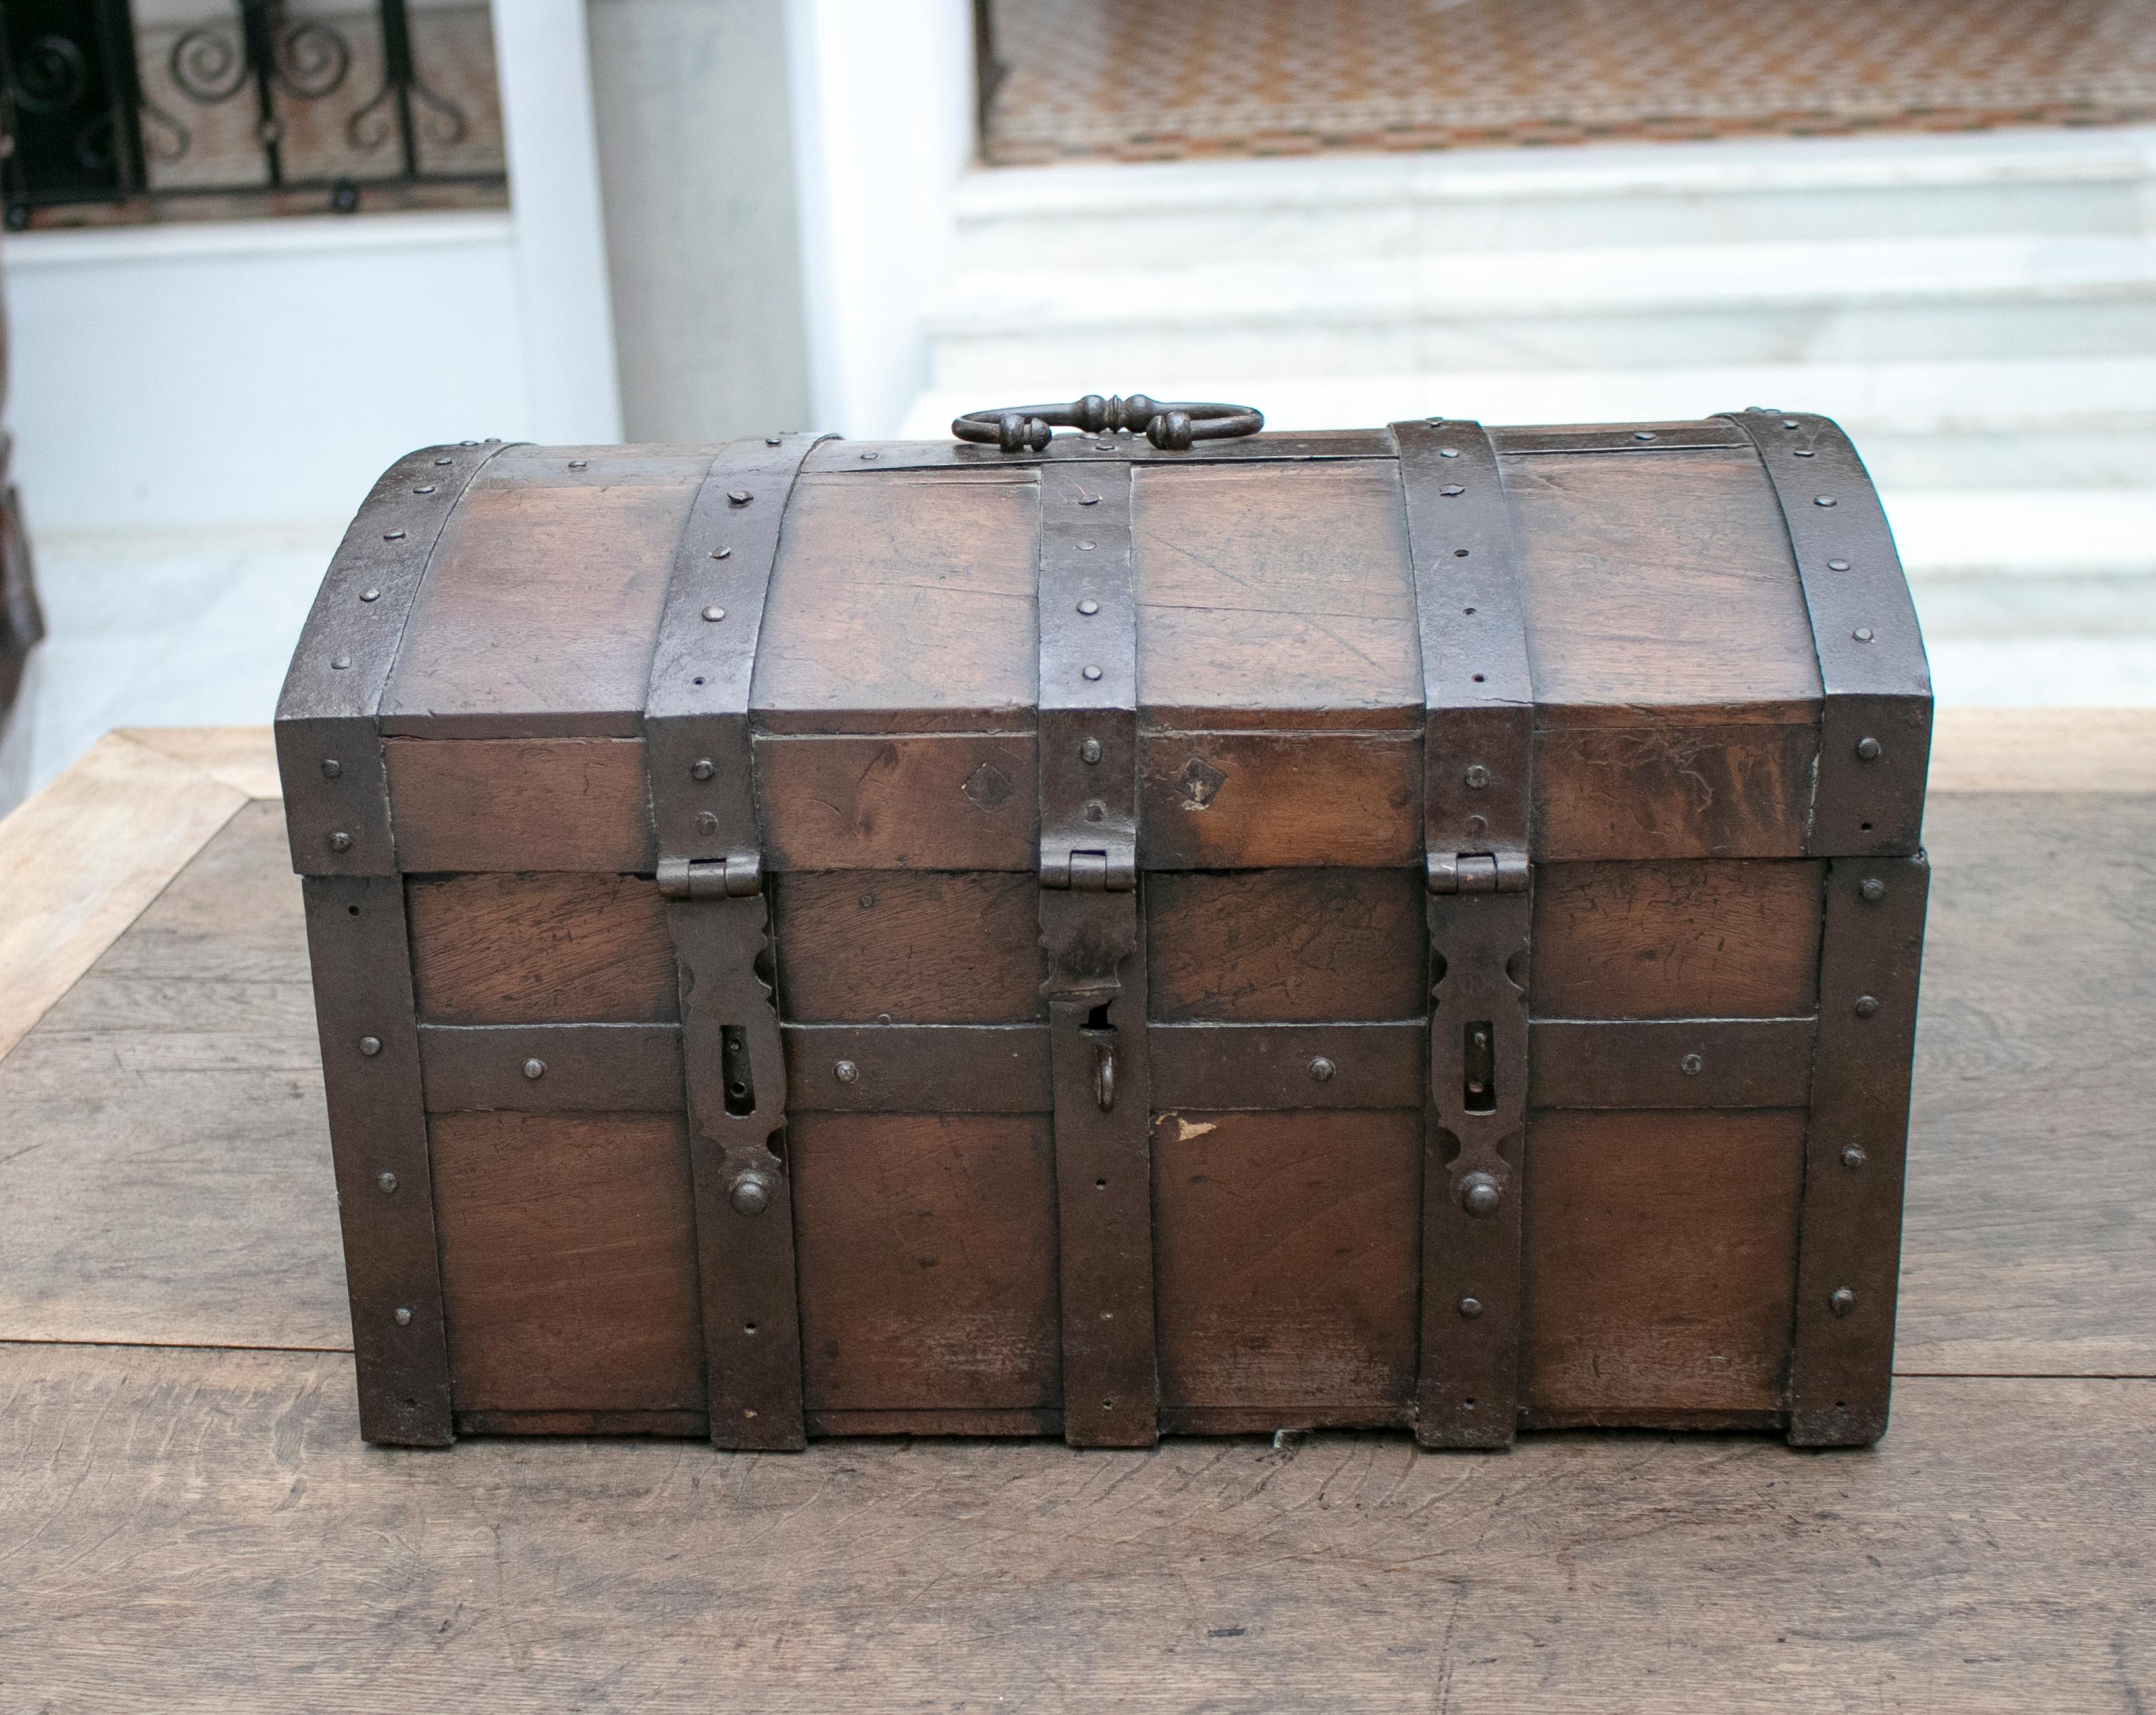 18th century Spanish walnut chest with wrought iron fittings and reinforcement.